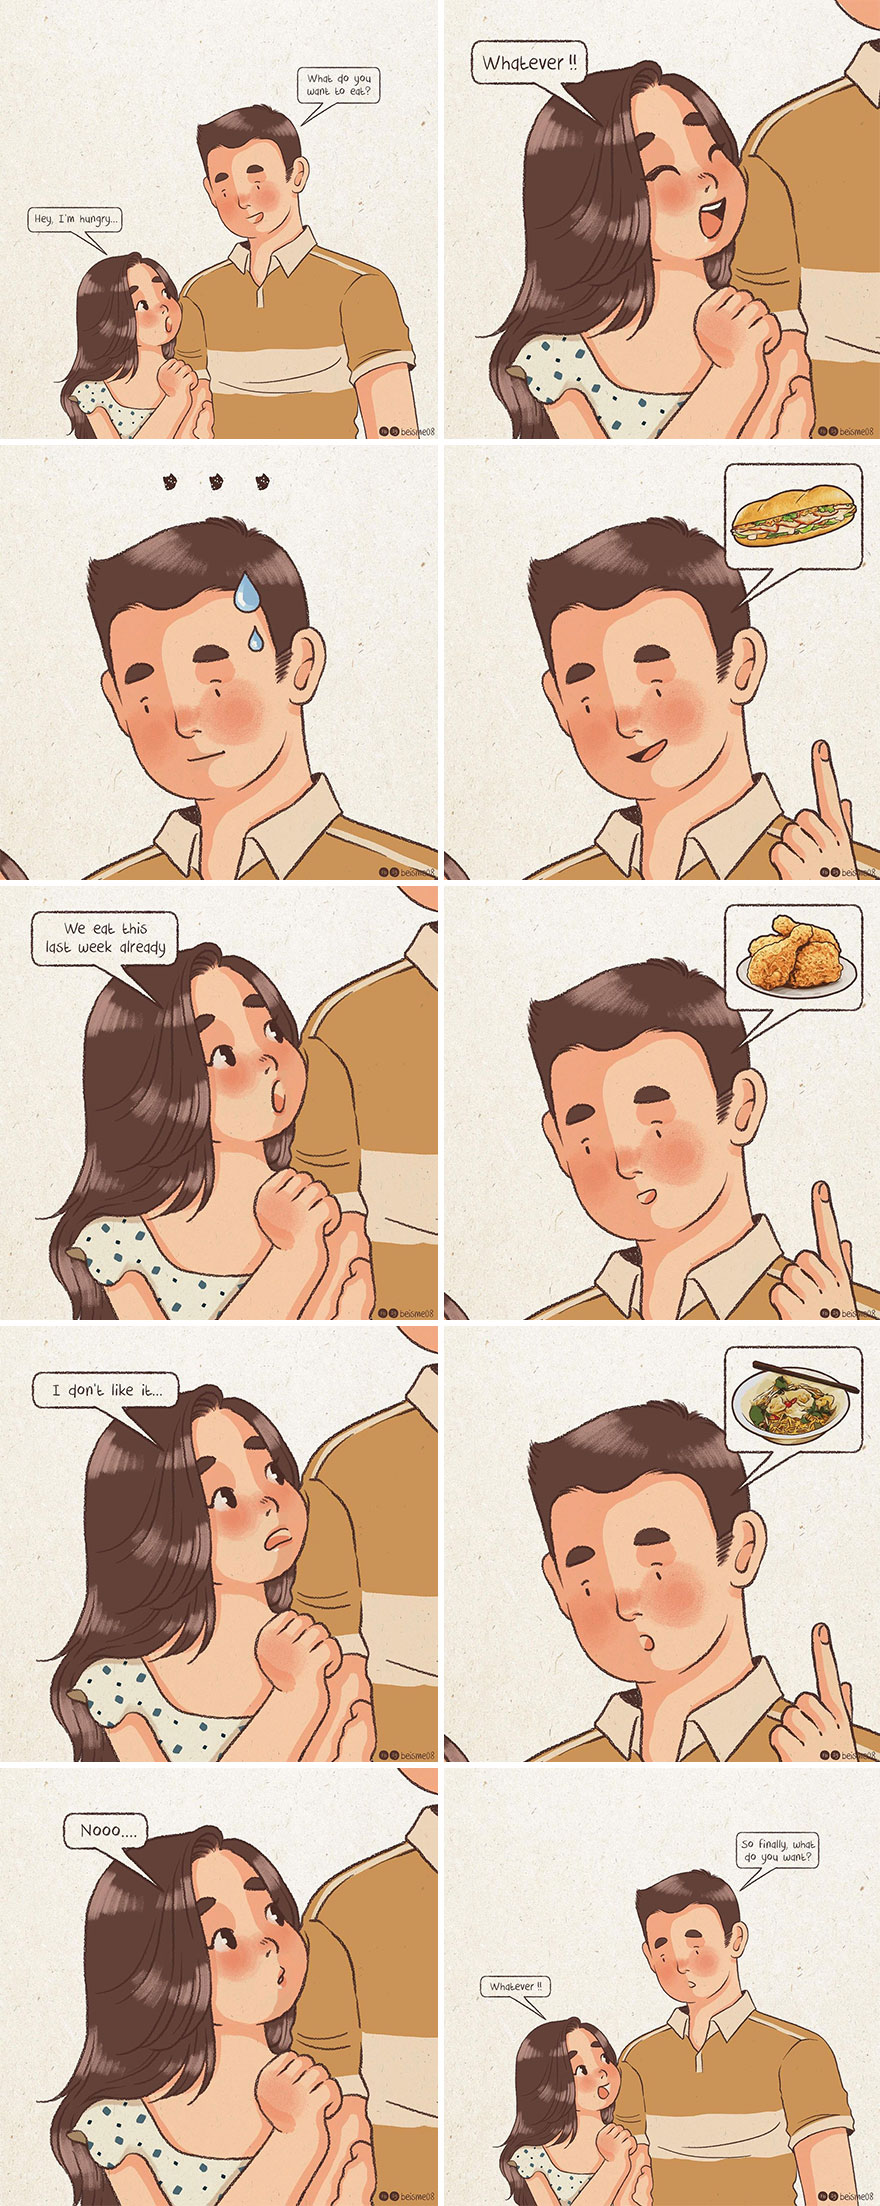 Couple-Relationship-Comics-Luong-Thuy-Beisme08